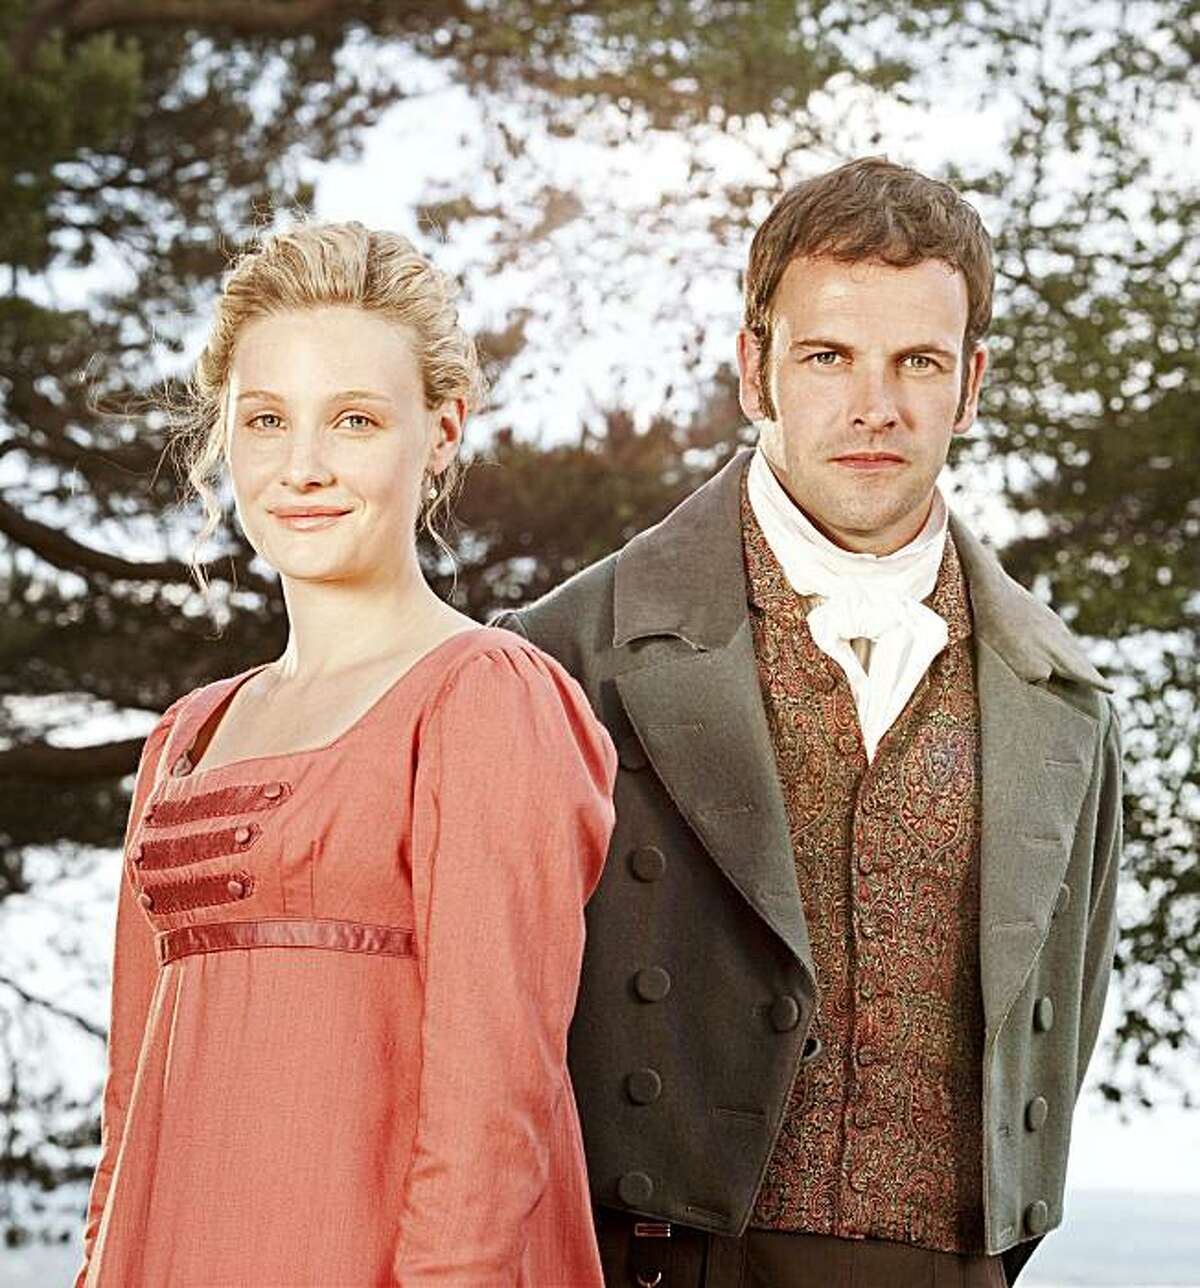 MASTERPIECE™ CLASSIC 'Emma:' A lavish new adaptation of one of Jane Austen’s most popular novels stars Romola Garai (left) as the “handsome, clever and rich” heroine and Jonny Lee Miller as her suitor, Mr. Knightley. WARNING This image may only be used for publicity purposes in connection with the broadcast of the programme as licensed by BBC Worldwide Ltd & must carry the shown copyright legend. It may not be used for any commercial purpose without a licence from the BBC. © BBC 2009